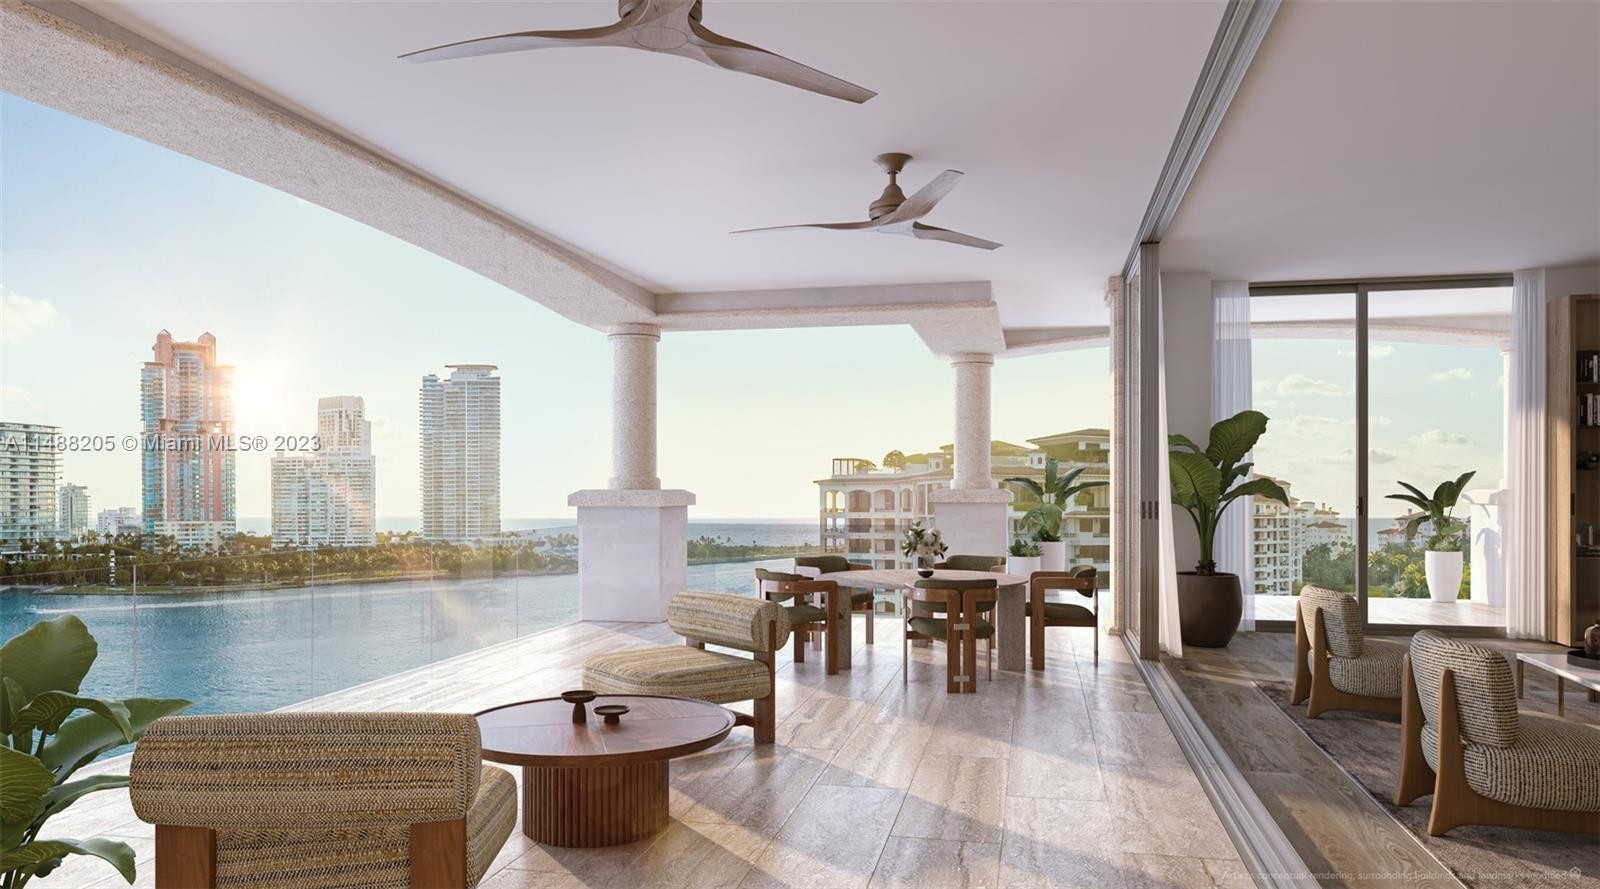 15. 6 Fisher Island Dr